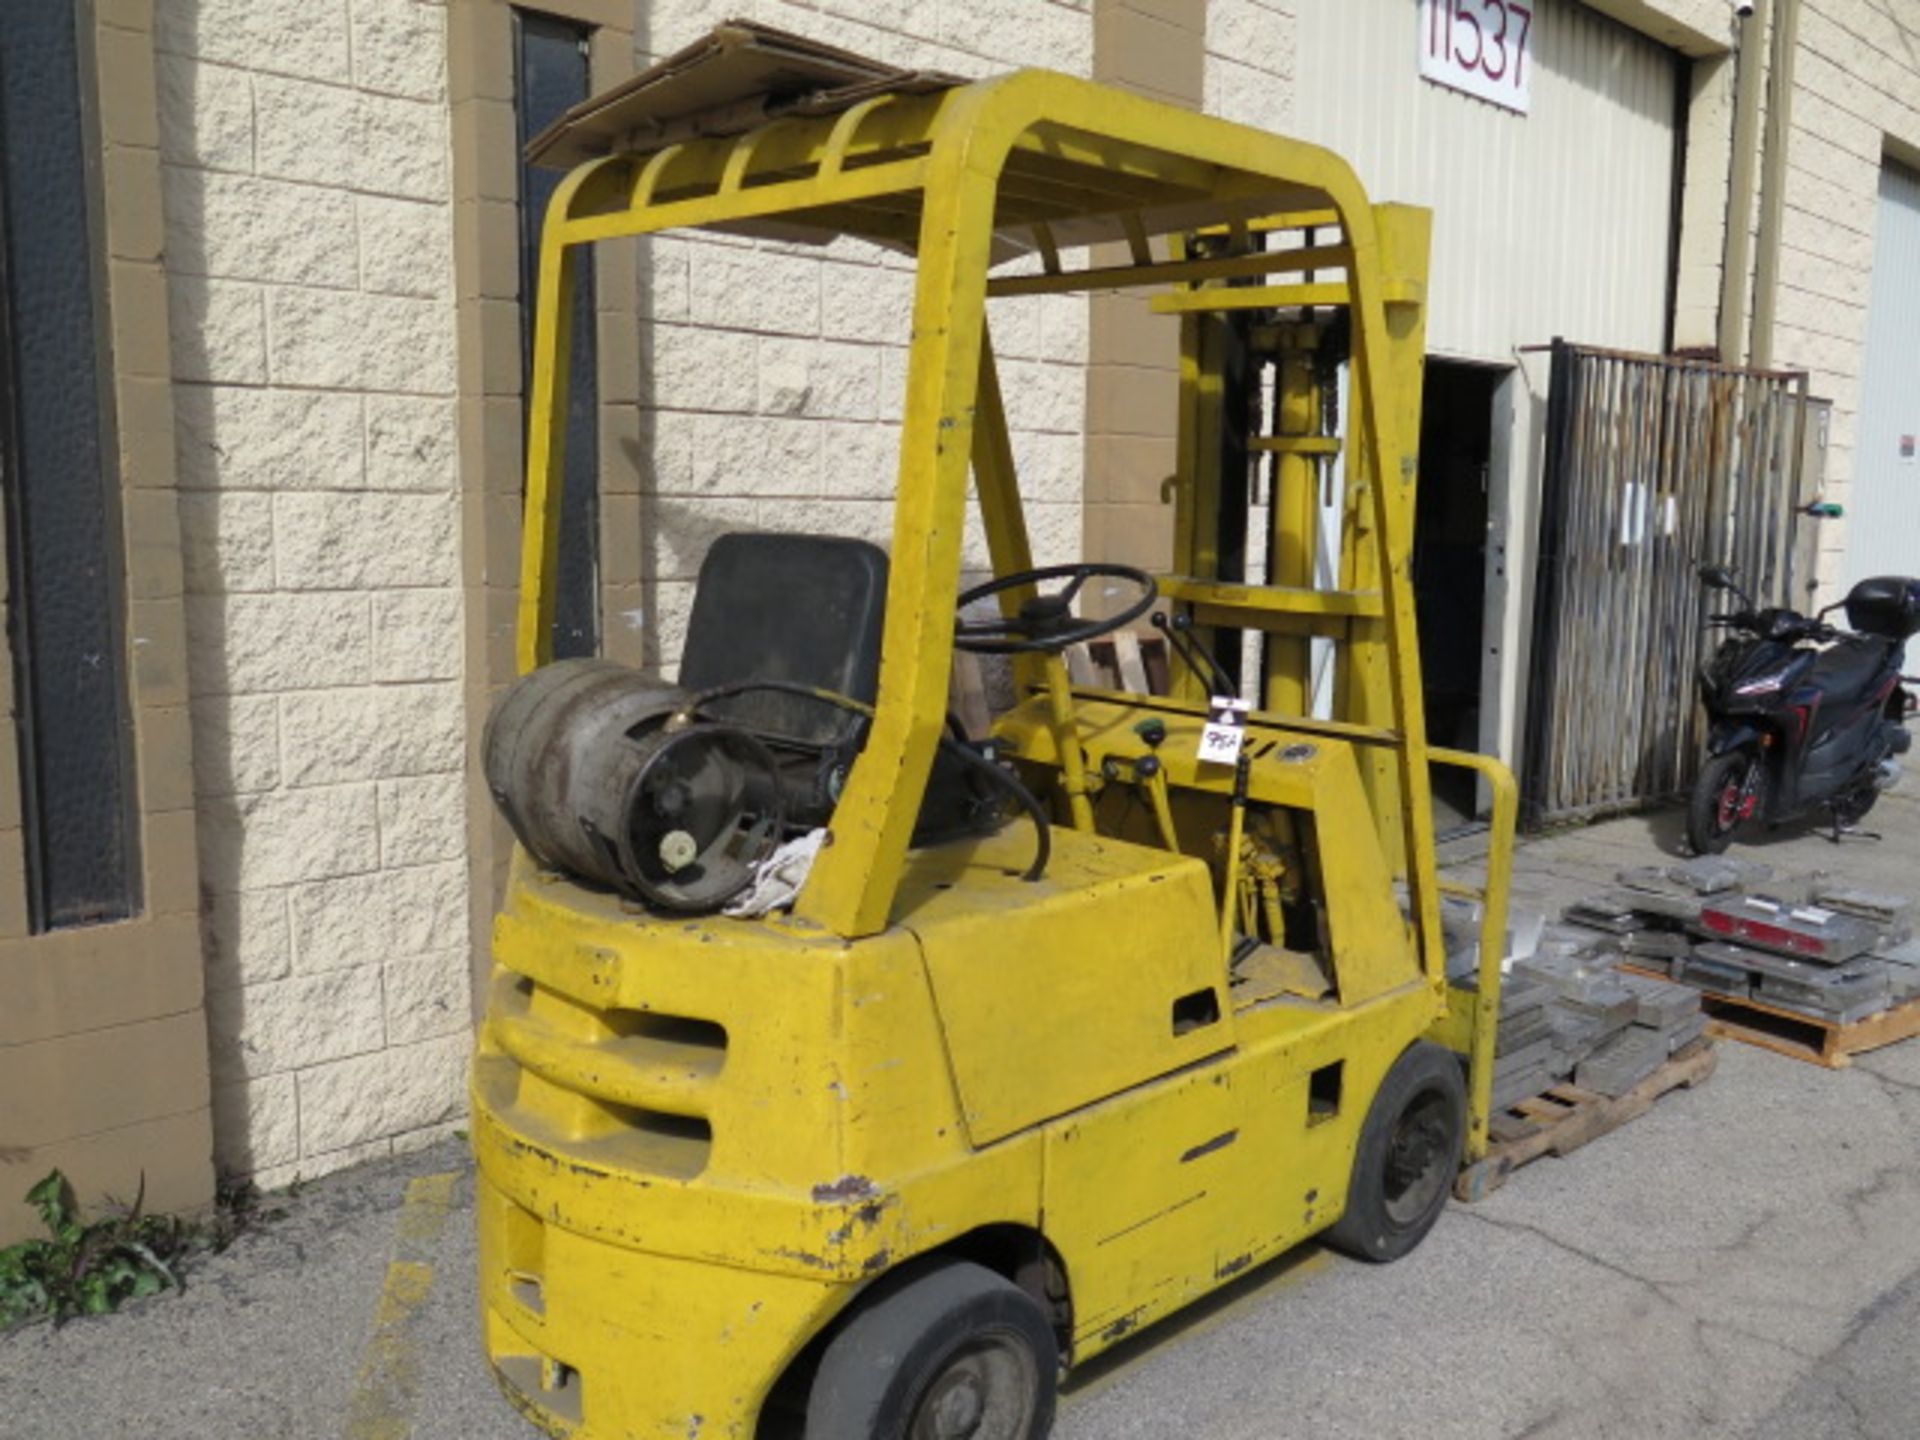 Toyota 2FGC20 4000 Lb Cap LPG Forklift s/n FGC20-12071 w/ 2-Stage Mast, 130” Lift Height, SOLD AS IS - Image 2 of 7